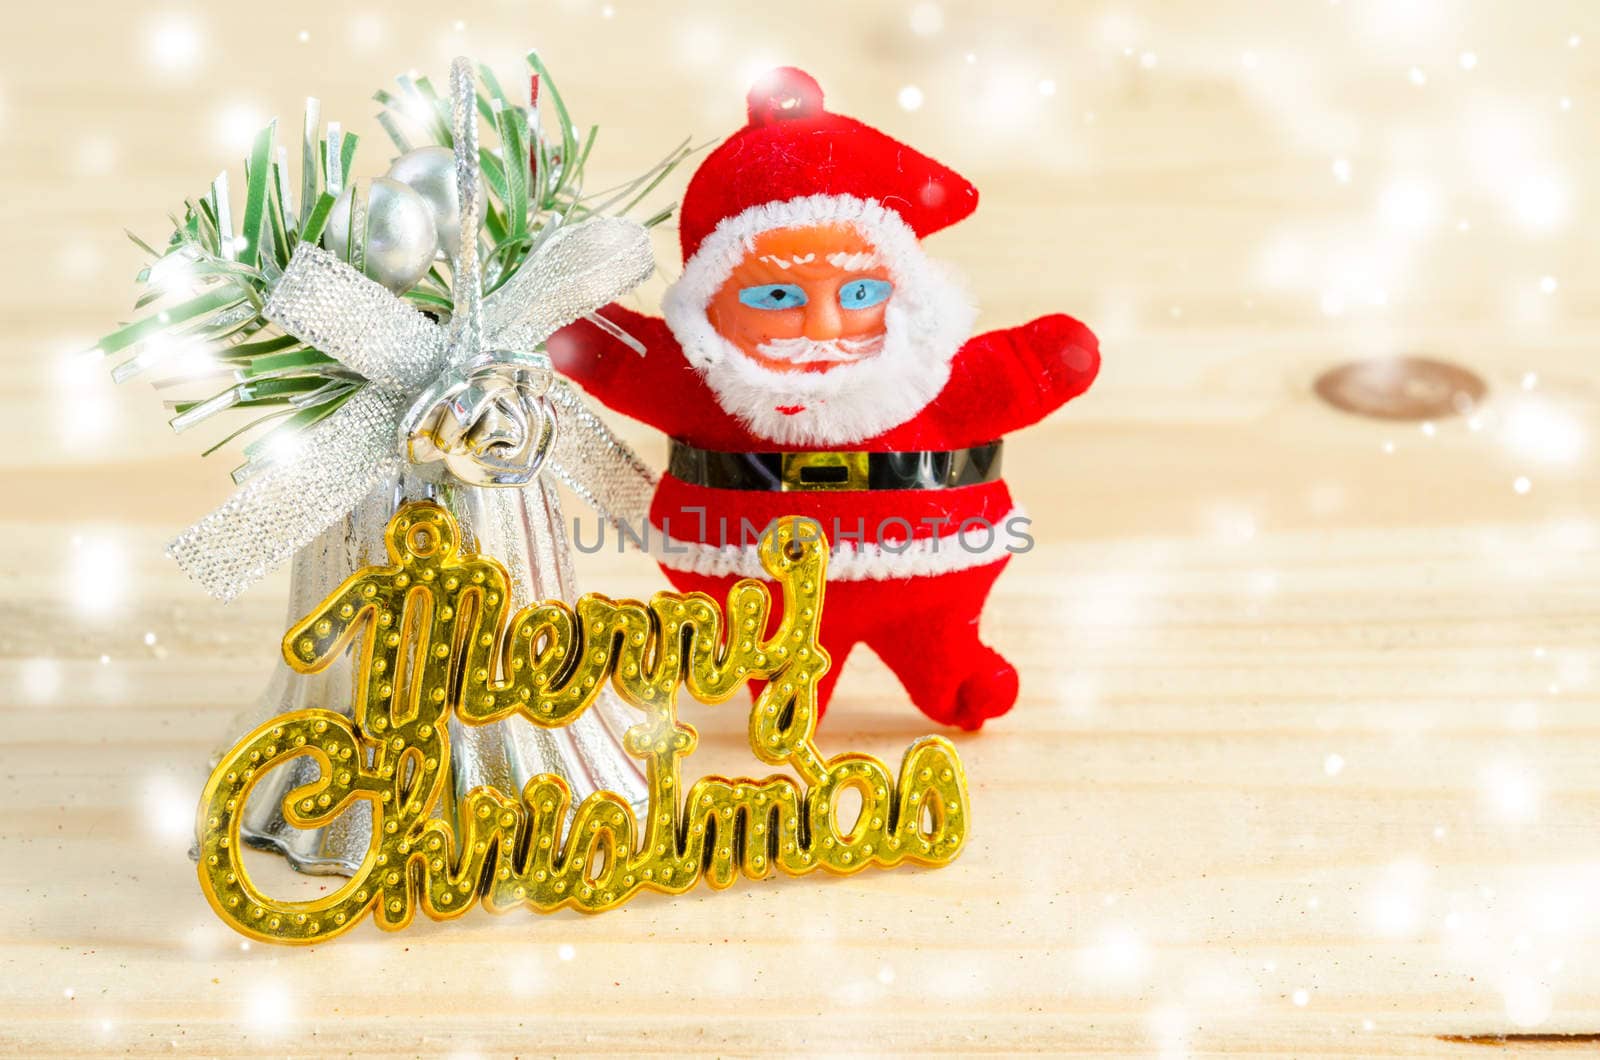 Merry christmas wording and santa doll with snow on wood background.